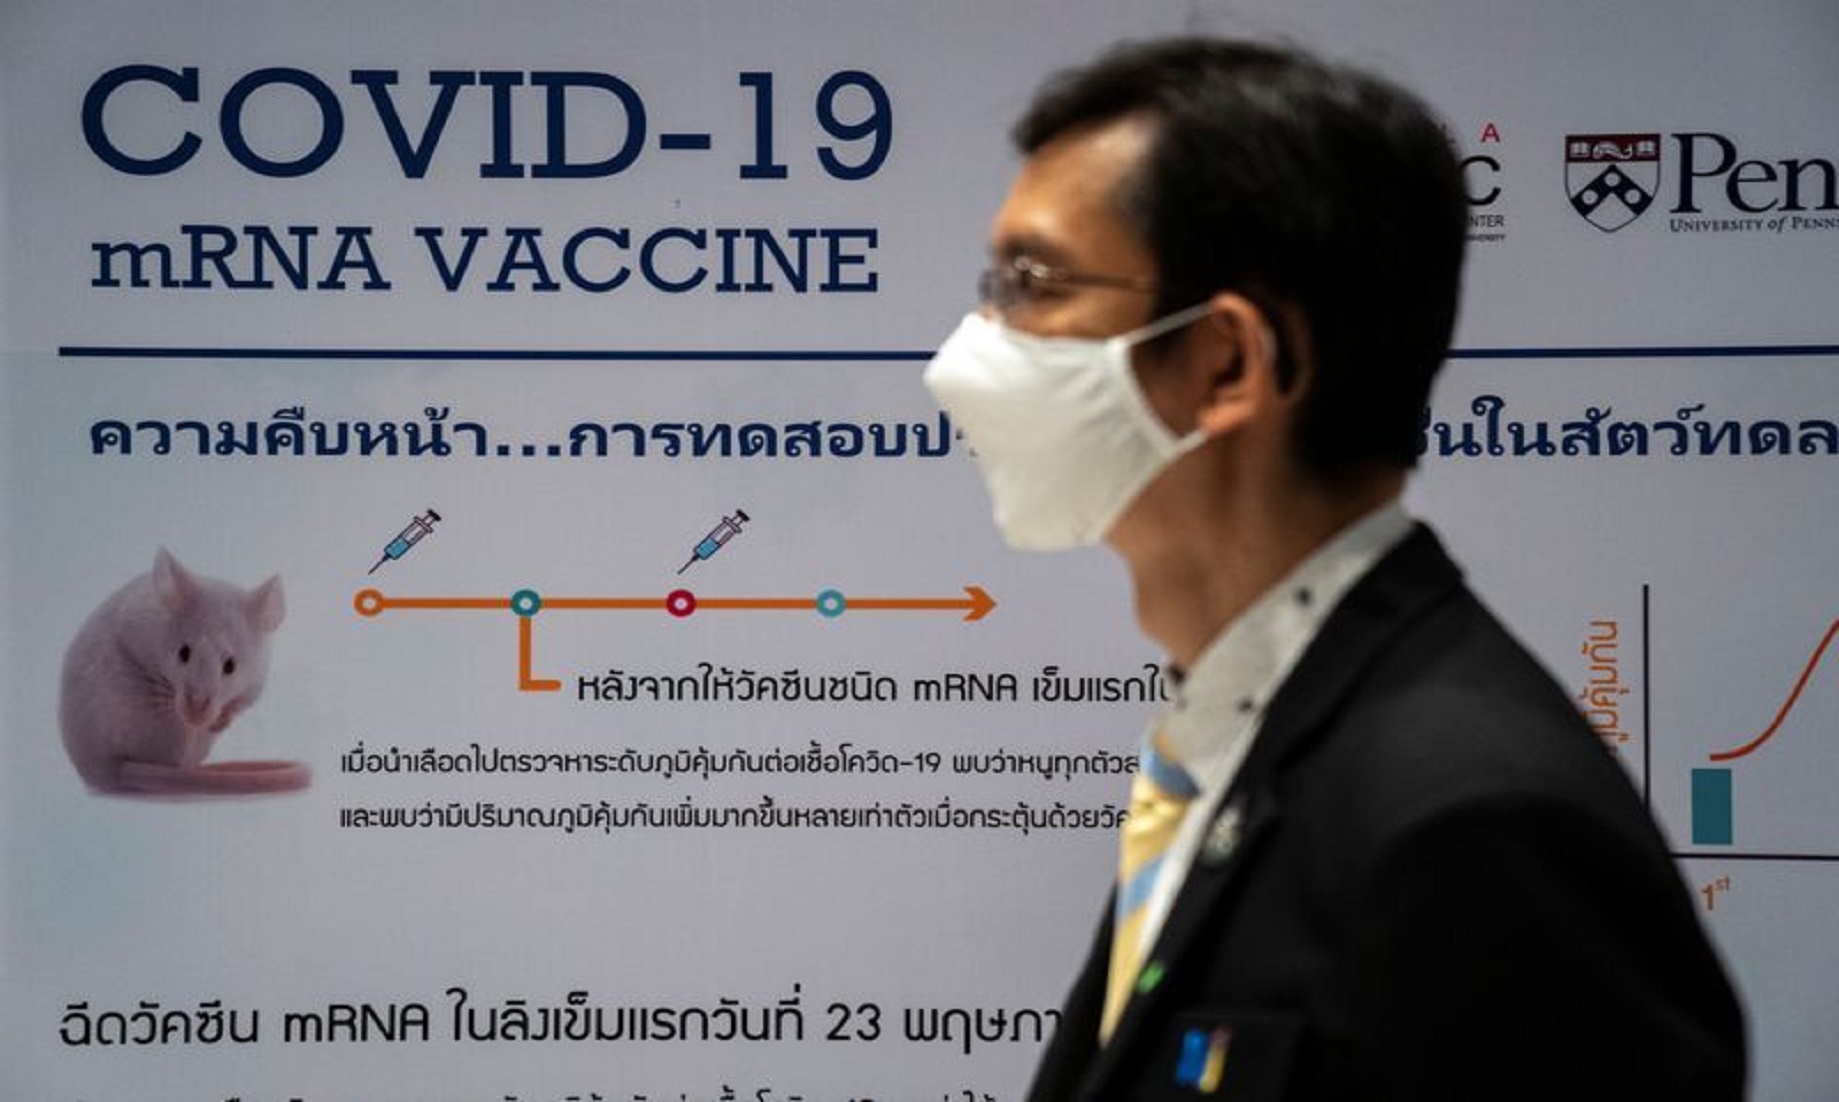 COVID: Thailand Records Nearly 1,000 New Cases Daily For Three Consecutive Days